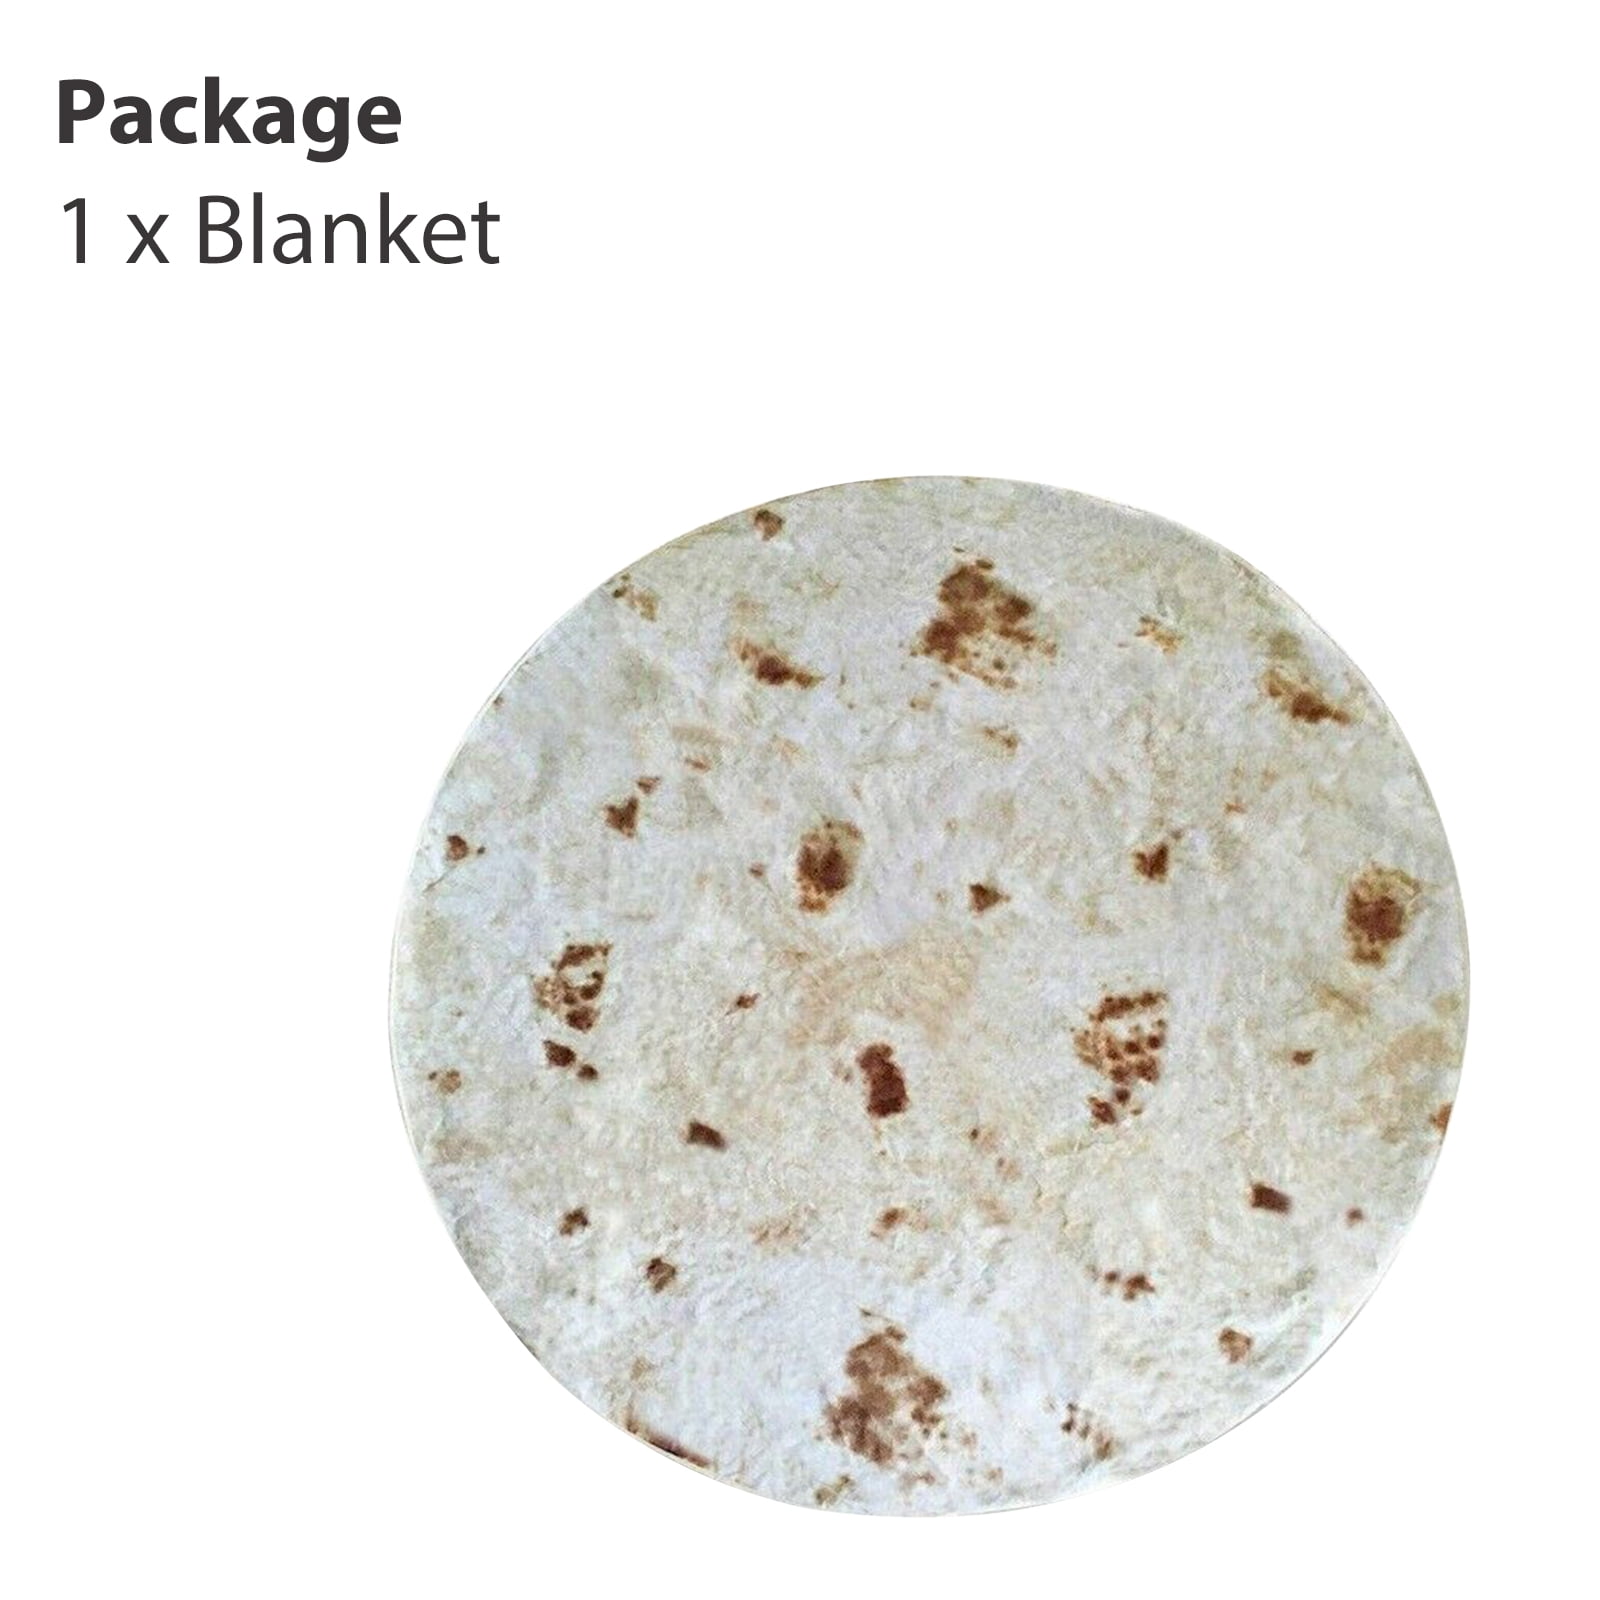 Mgput Burritos Tortilla Blanket-Realistic Burritos Wrap Giant Round Blanket-Soft and Comfortable Flannel Kids' Throw Blankets for Bed-Couch or Travel 